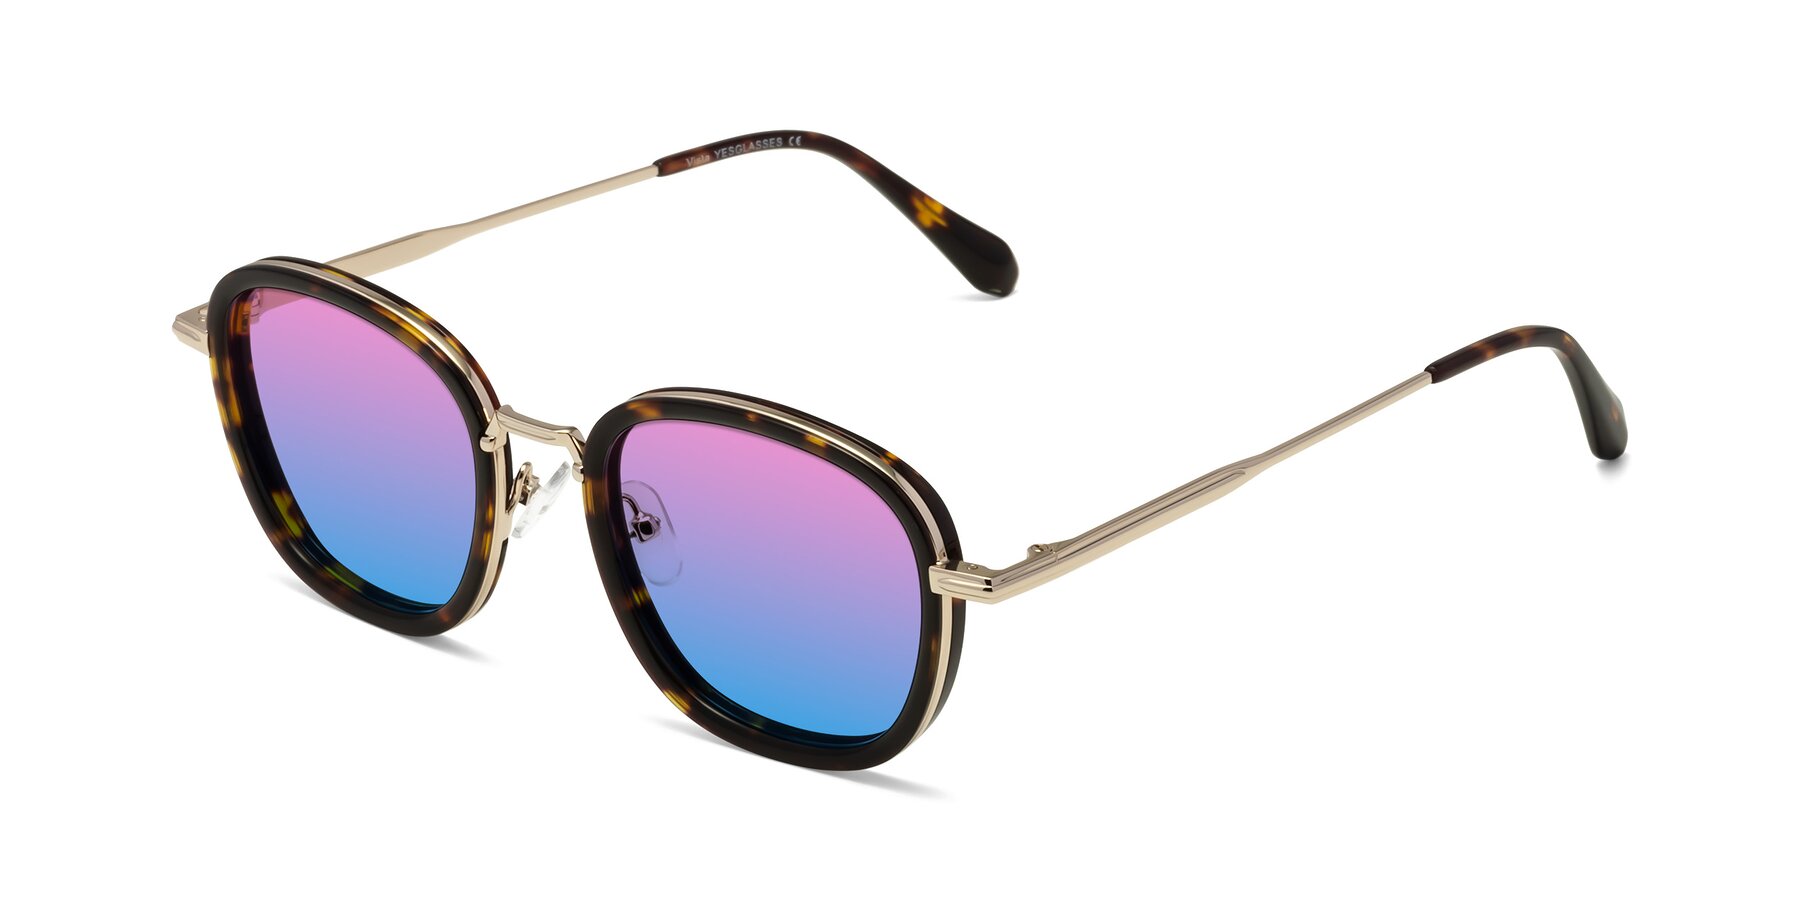 Angle of Vista in Tortoise-Light Gold with Pink / Blue Gradient Lenses